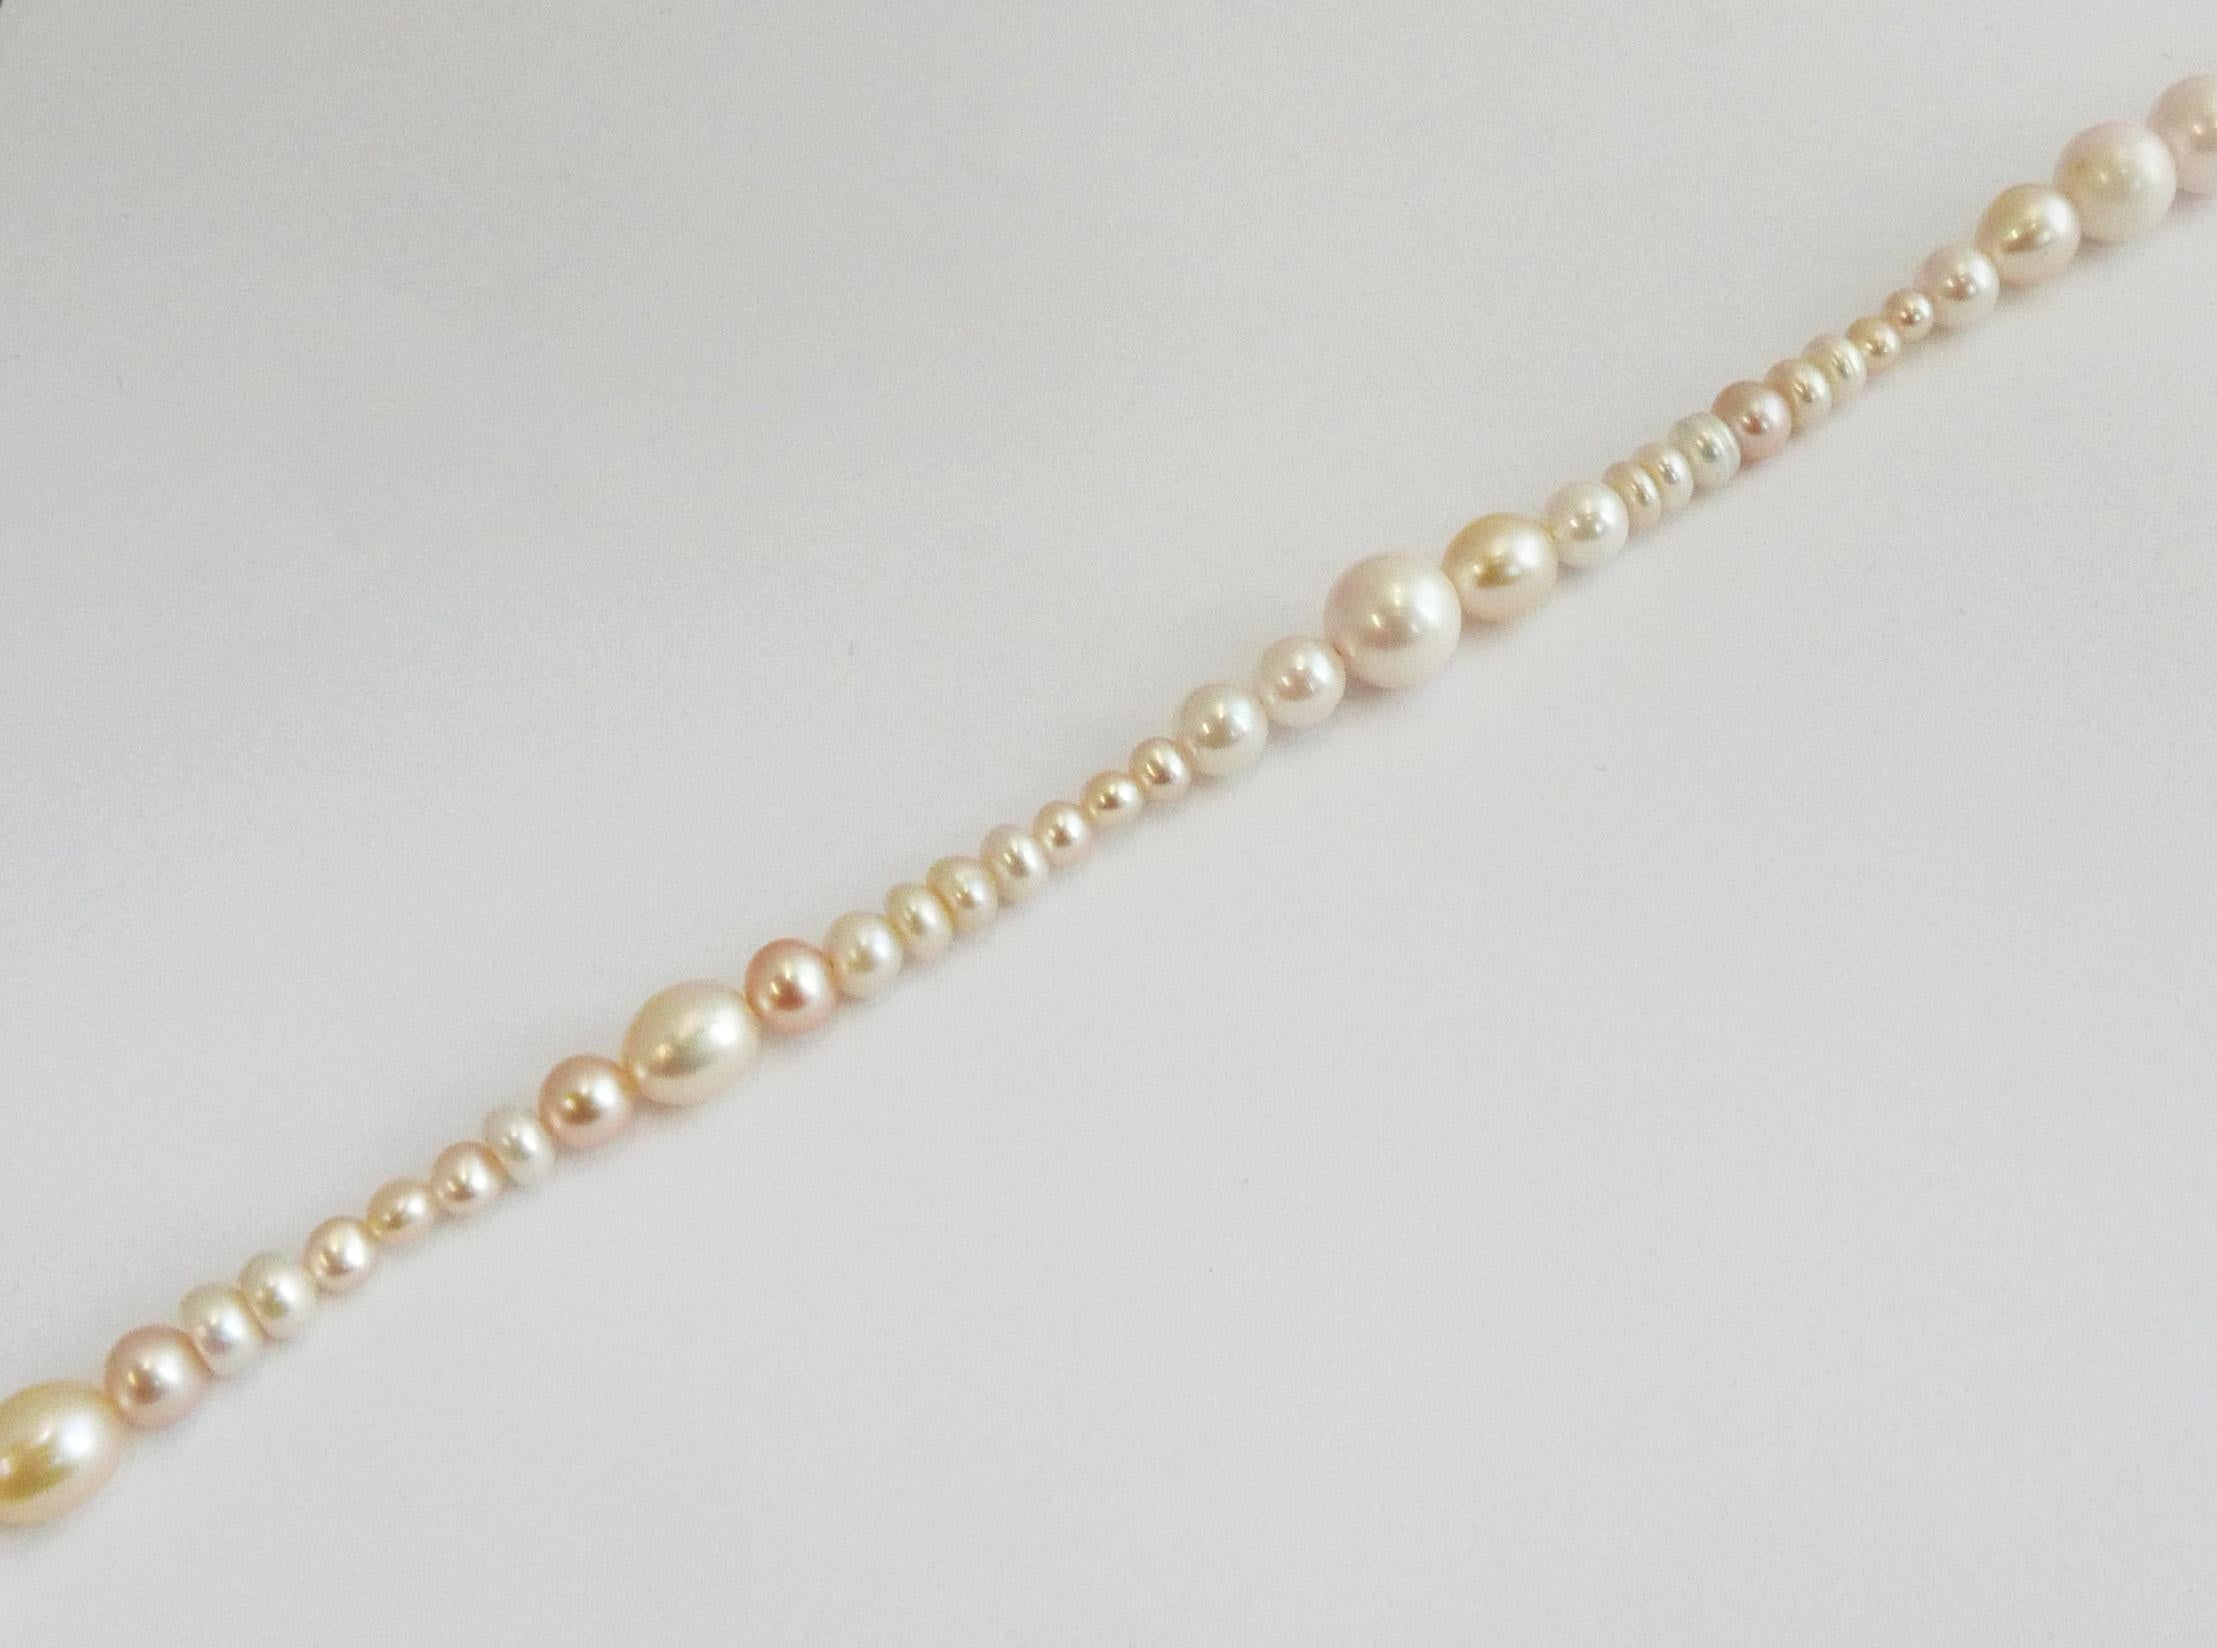 pearl necklace with different size pearls